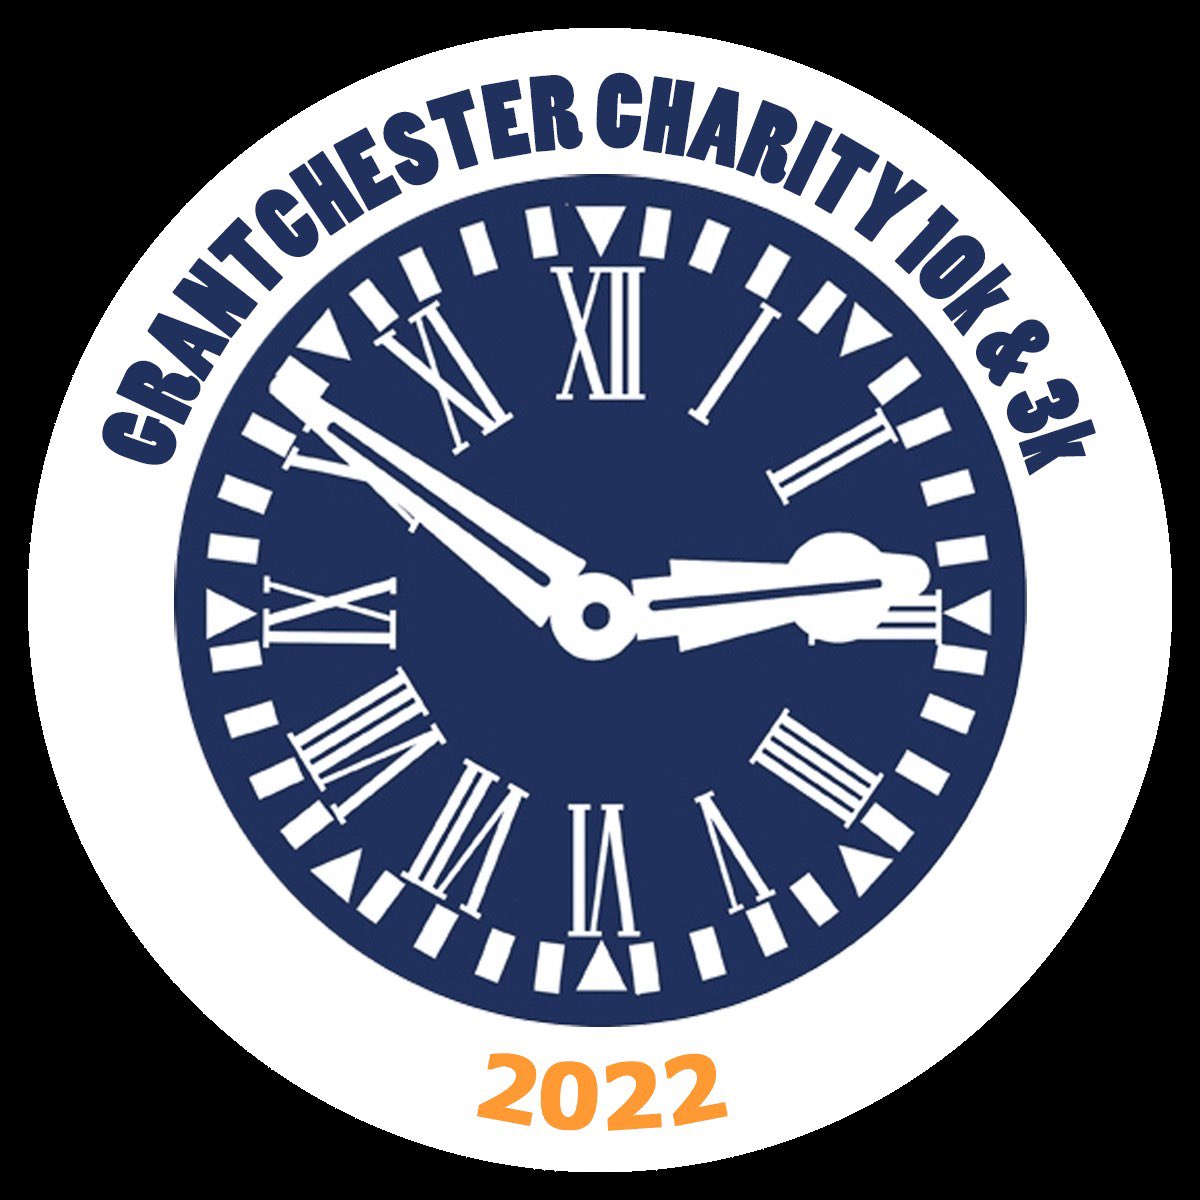 There is still time to register for the Granchester 10k, Sunday Sept 25th, 2022!🏃🏽🏃🏼‍♂️🏃‍♀️ Online registration closes at 9am Thursday September 2022 Register here - grantchester10k.org #granchester #granchester10k